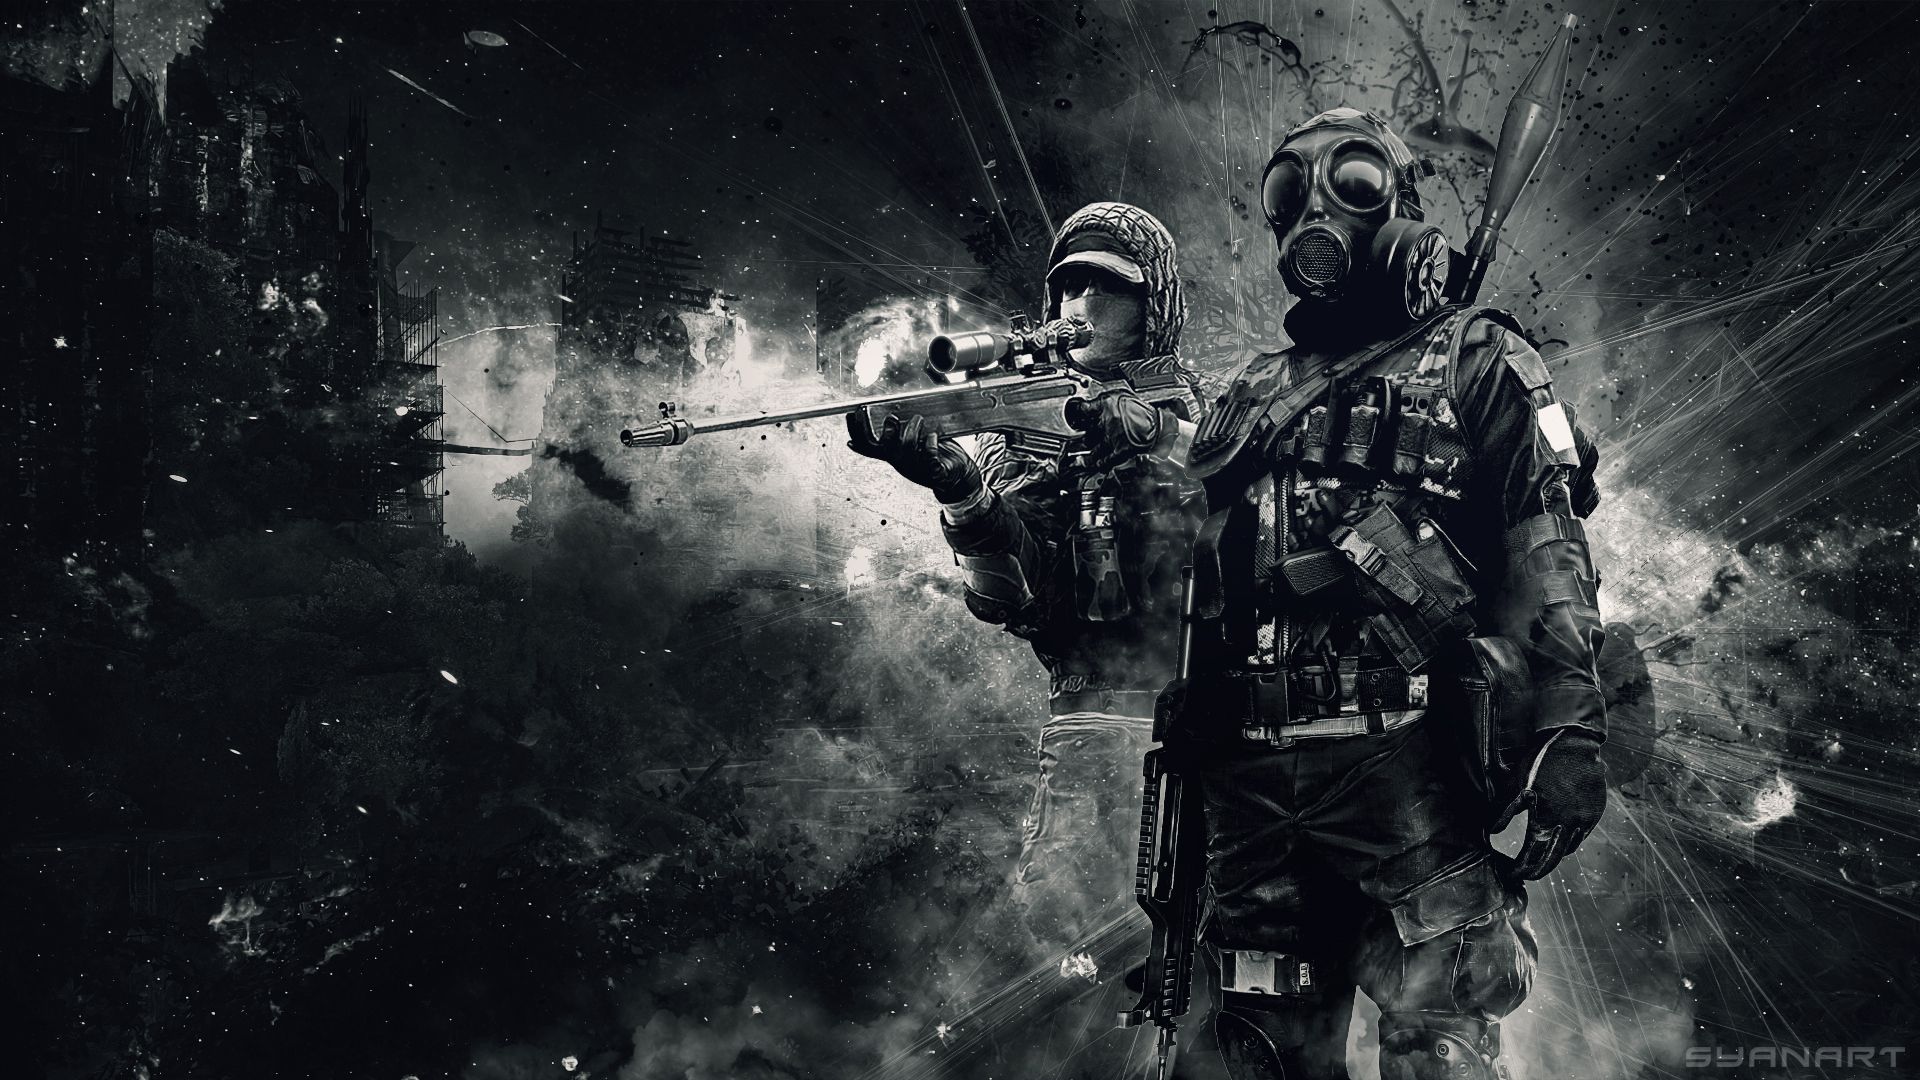 Black Ops Soldiers Wallpapers - Wallpaper Cave